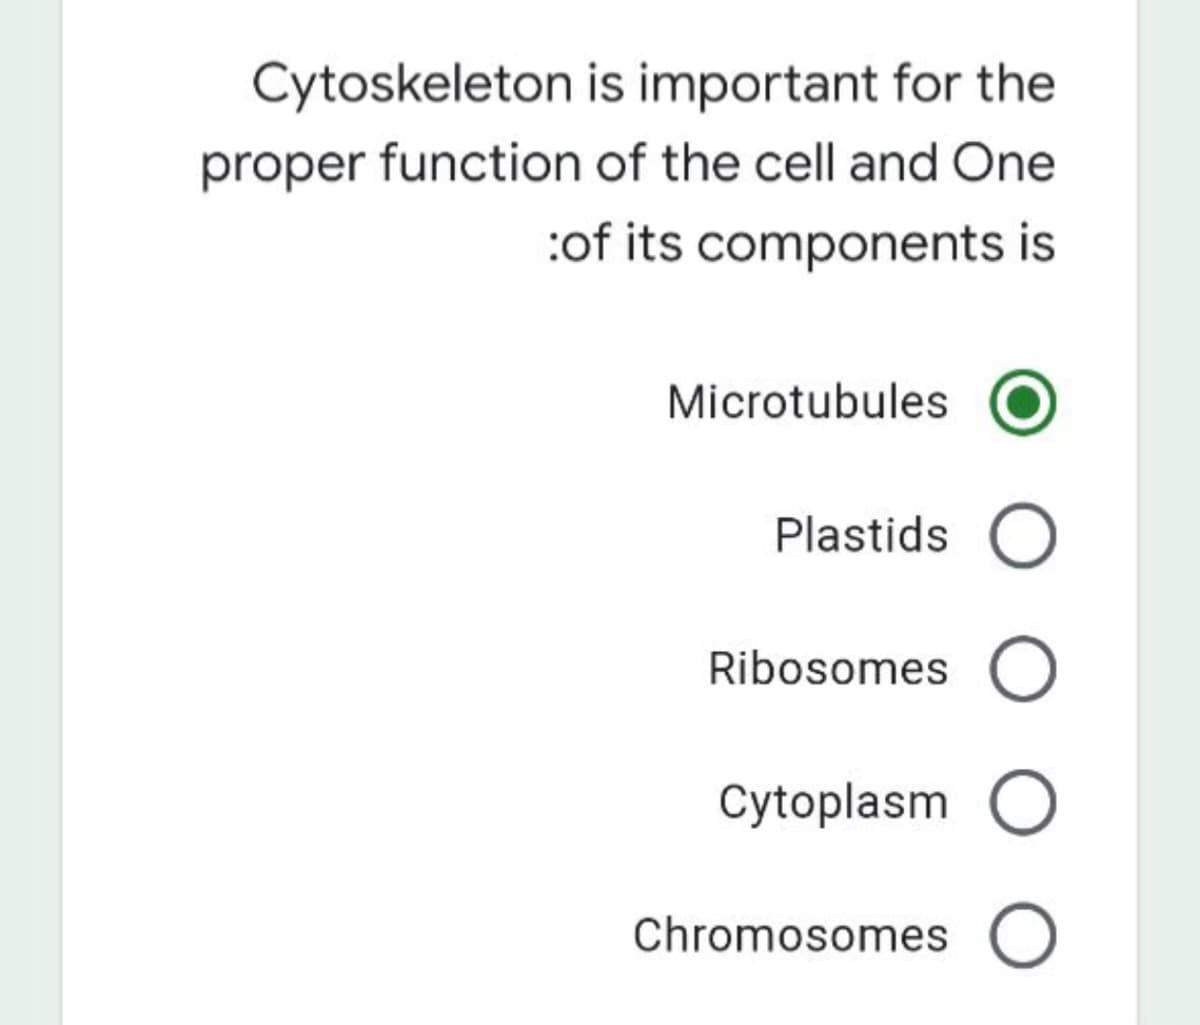 Cytoskeleton is important for the
proper function of the cell and One
:of its components is
Microtubules
Plastids O
Ribosomes
Cytoplasm O
Chromosomes O
